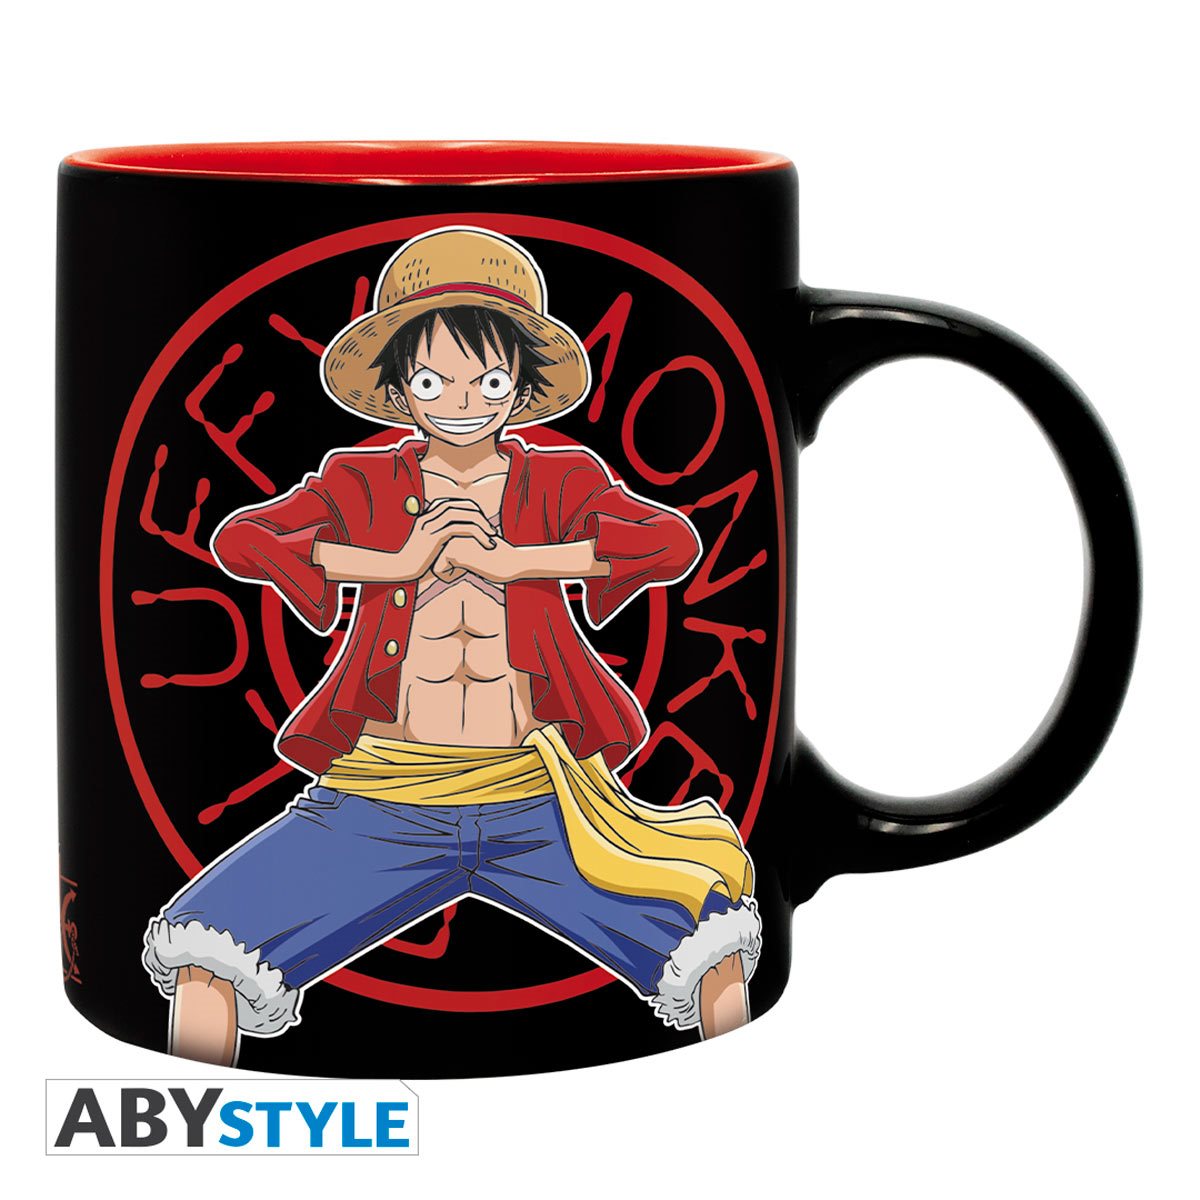 One Piece Monkey D. Luffy Journal 3Pack Gift Set